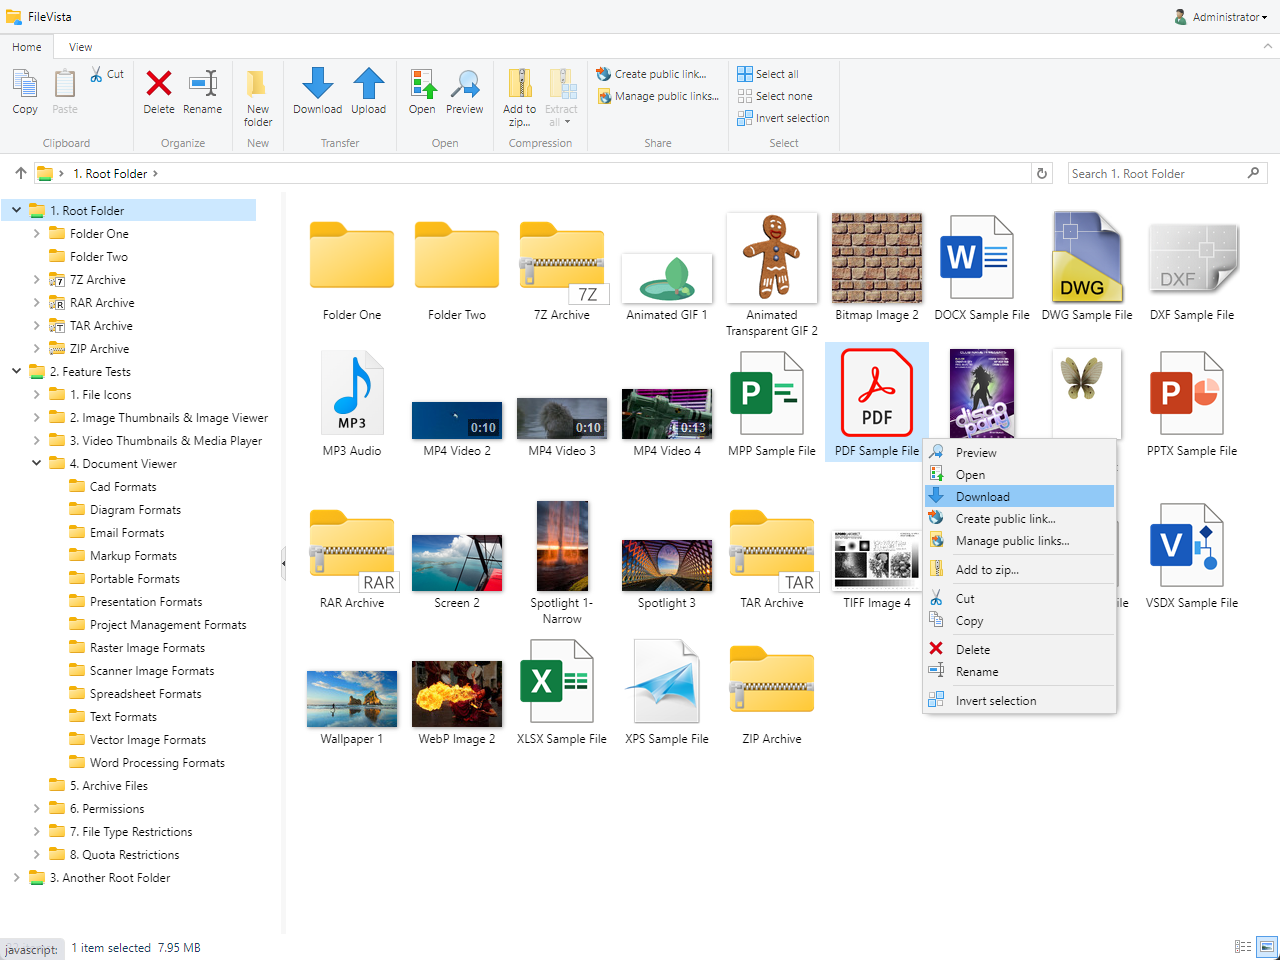 Web File Manager (Self-Hosted File Sharing, Own Cloud Storage)